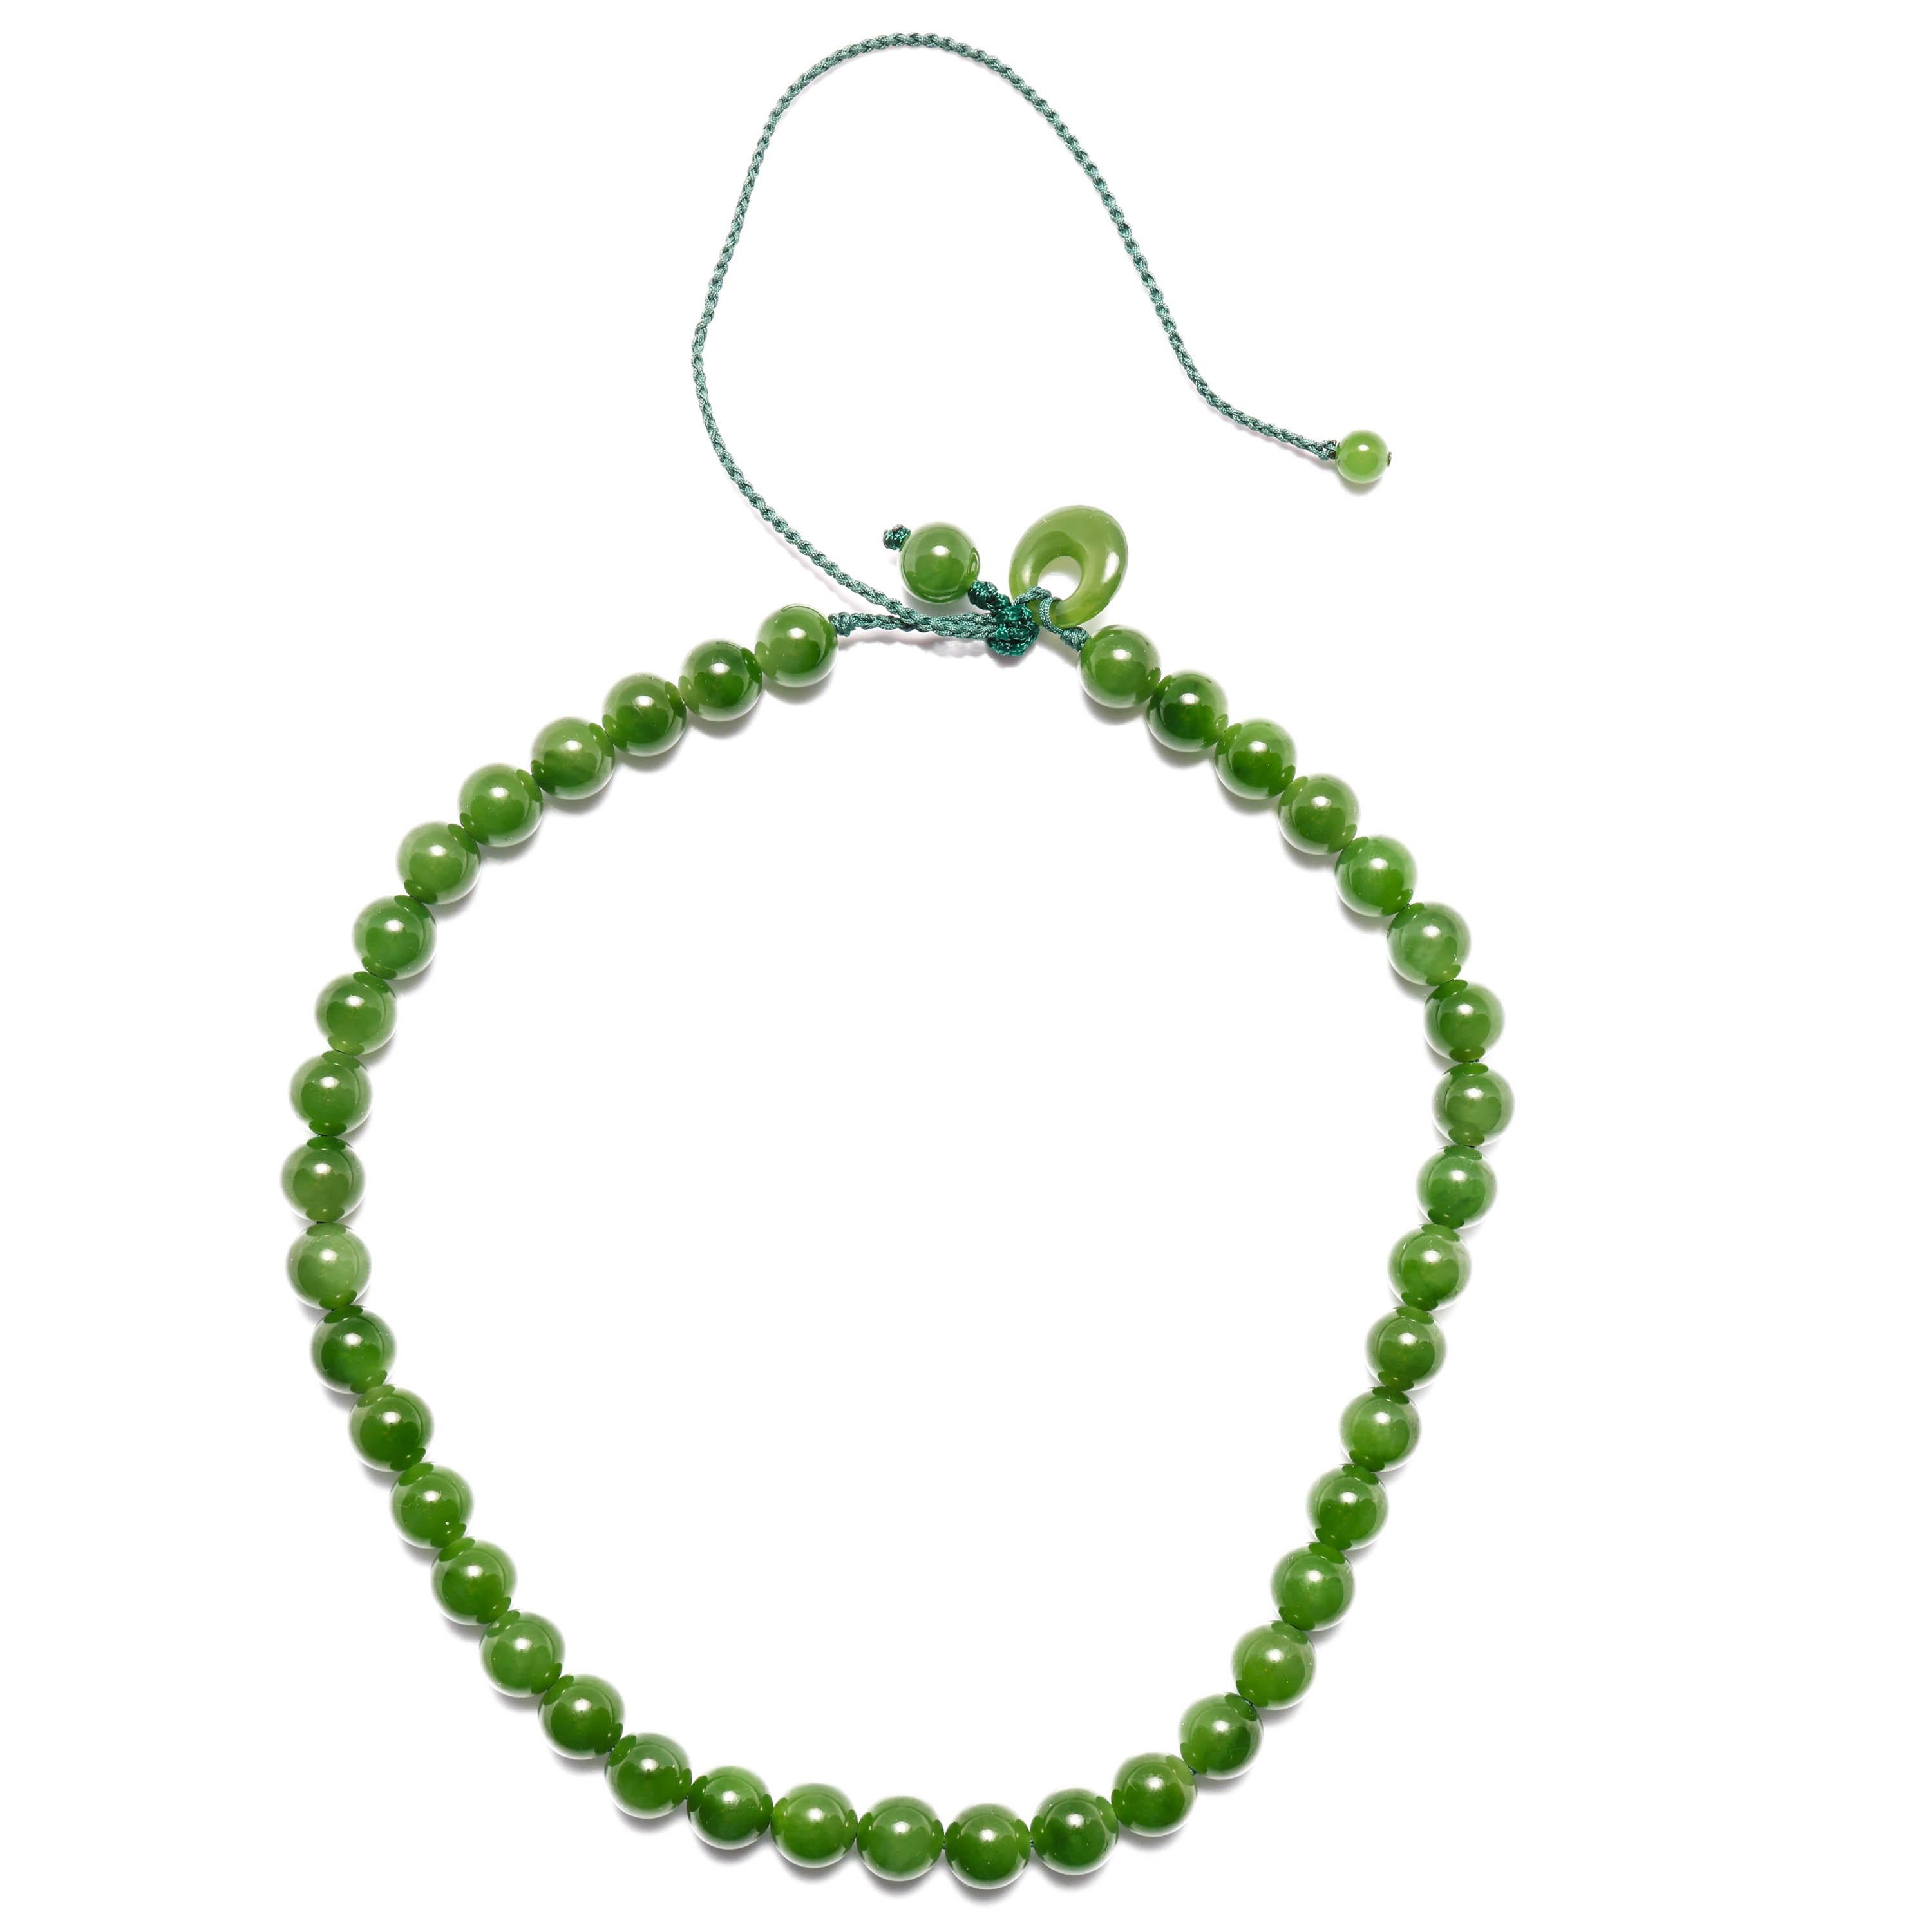 This is a brand new, handmade necklace created from very fine, highly translucent green nephrite jade beads, ranging in size from 9.4mm -9.7mm. The forrest-green color is evenly distributed throughout the 41 beads. There is a sliding knot to adjust